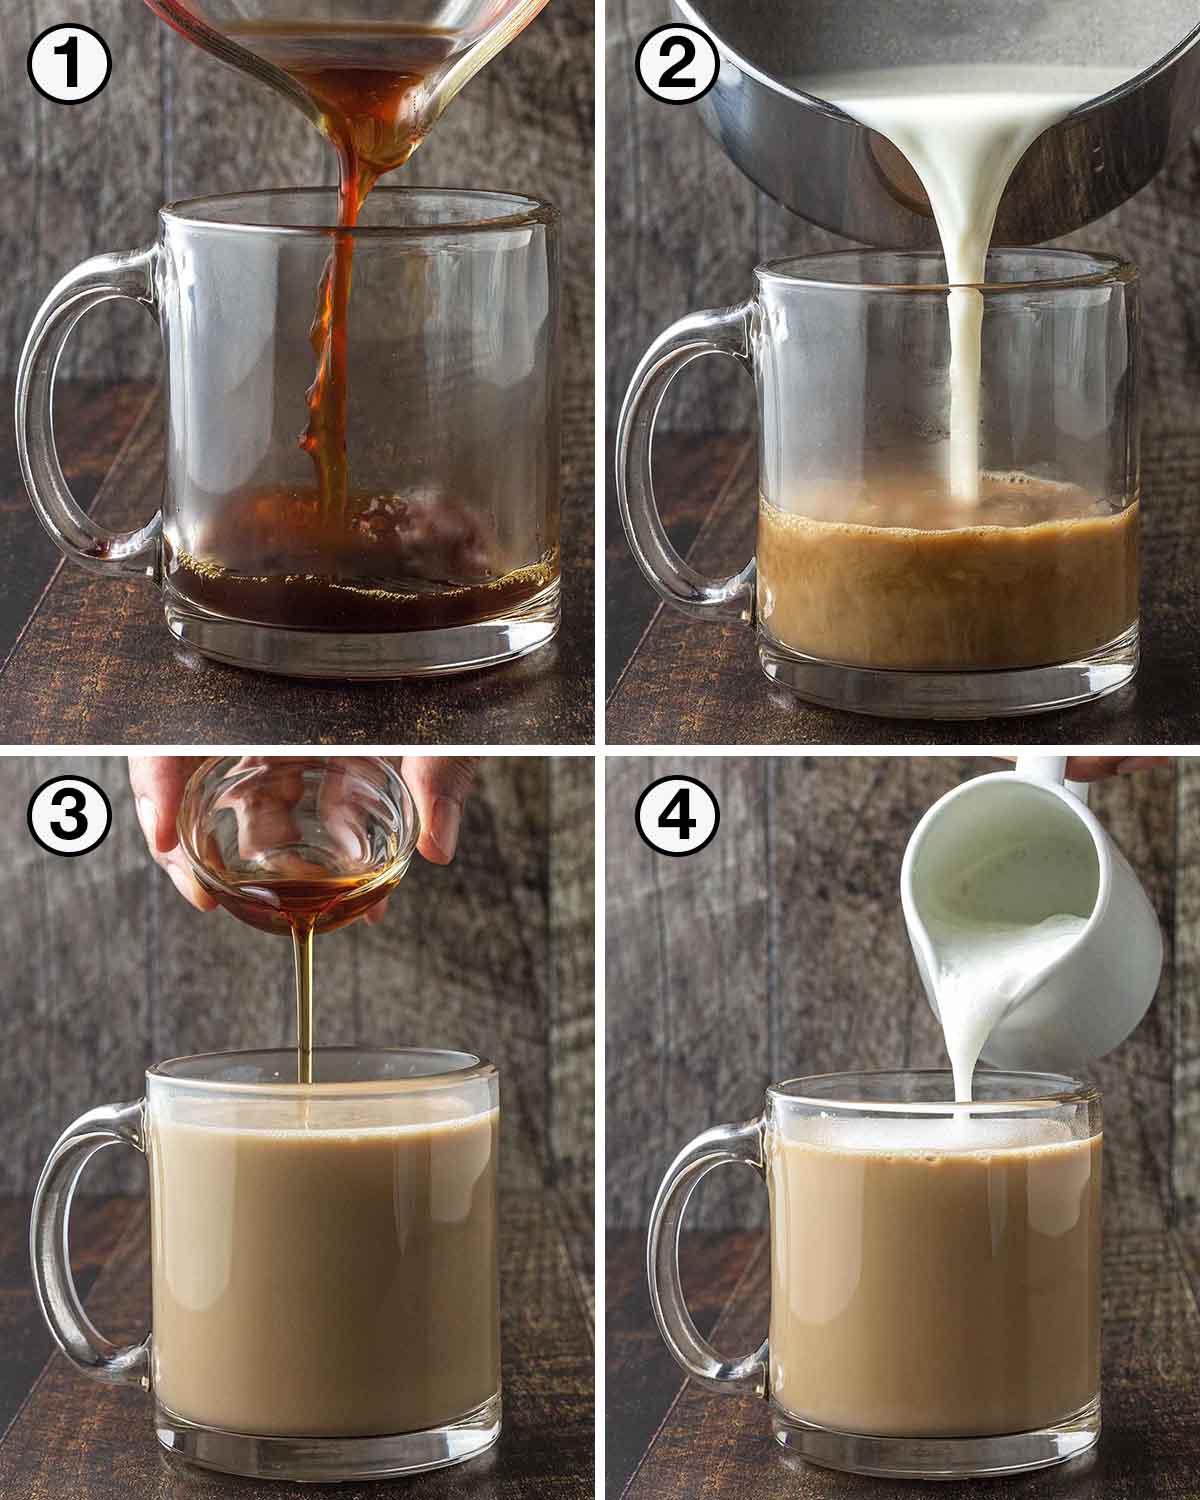 A collage of four images showing the sequence of steps needed to make an oat milk latte.